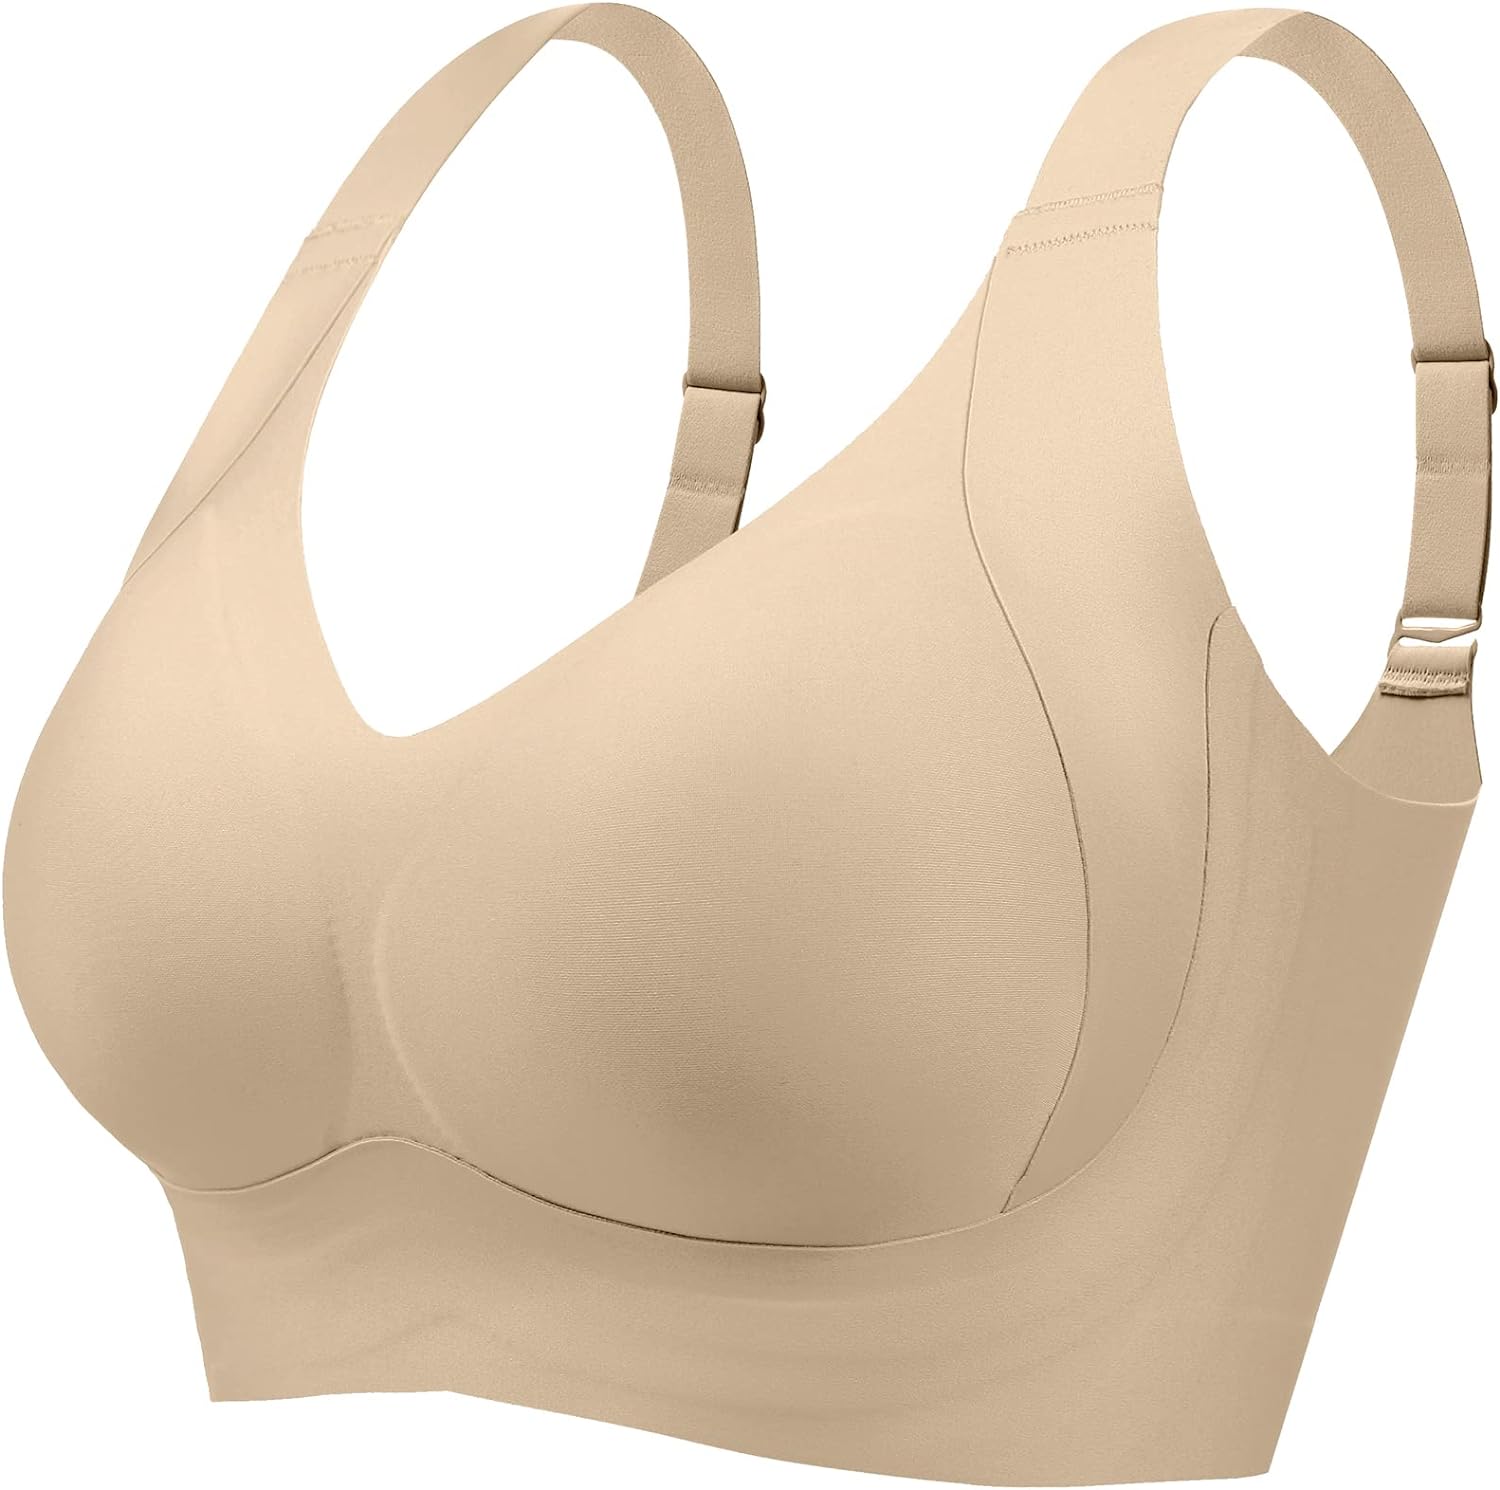 Buy Daily Use Comfortable Bra at